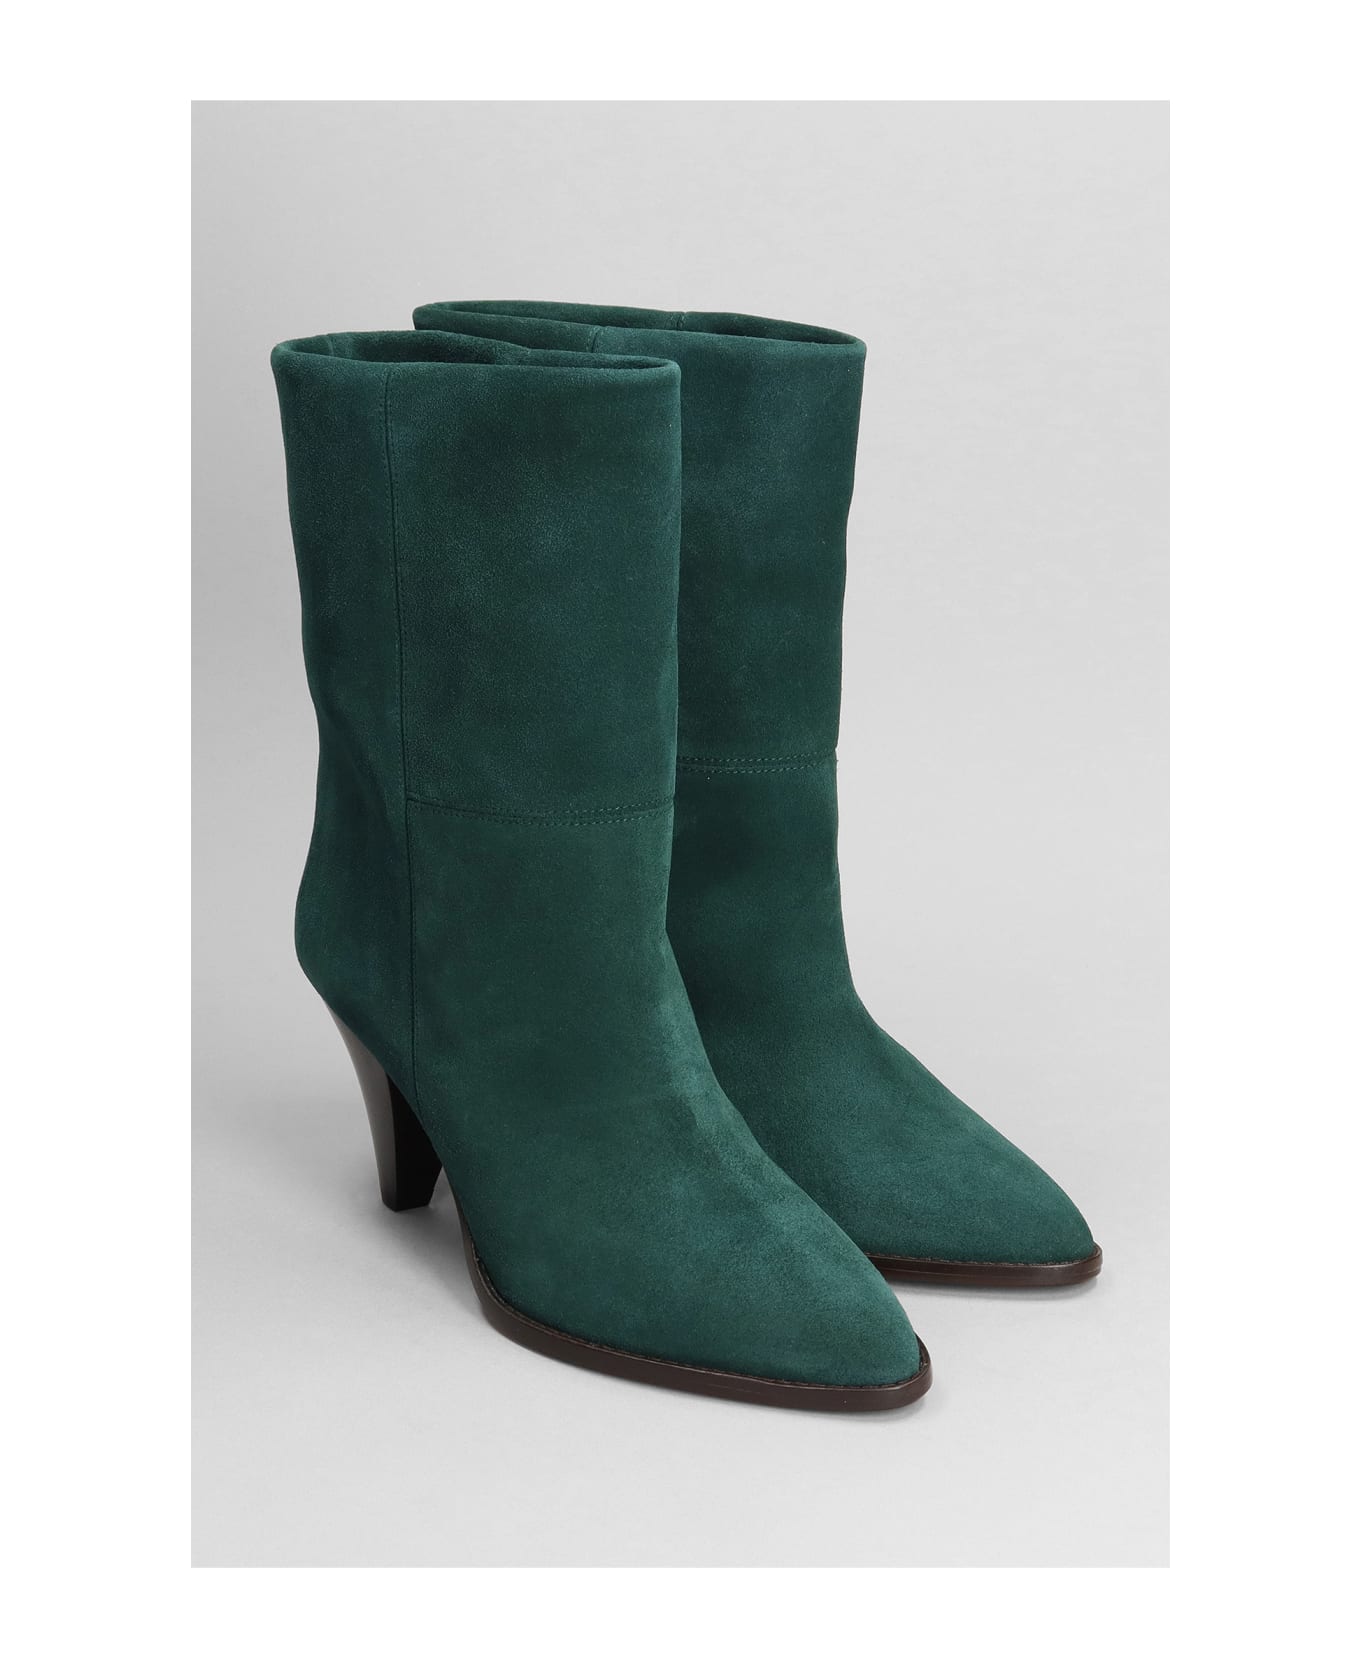 Isabel Marant Rouxa High Heels Ankle Boots - green ブーツ